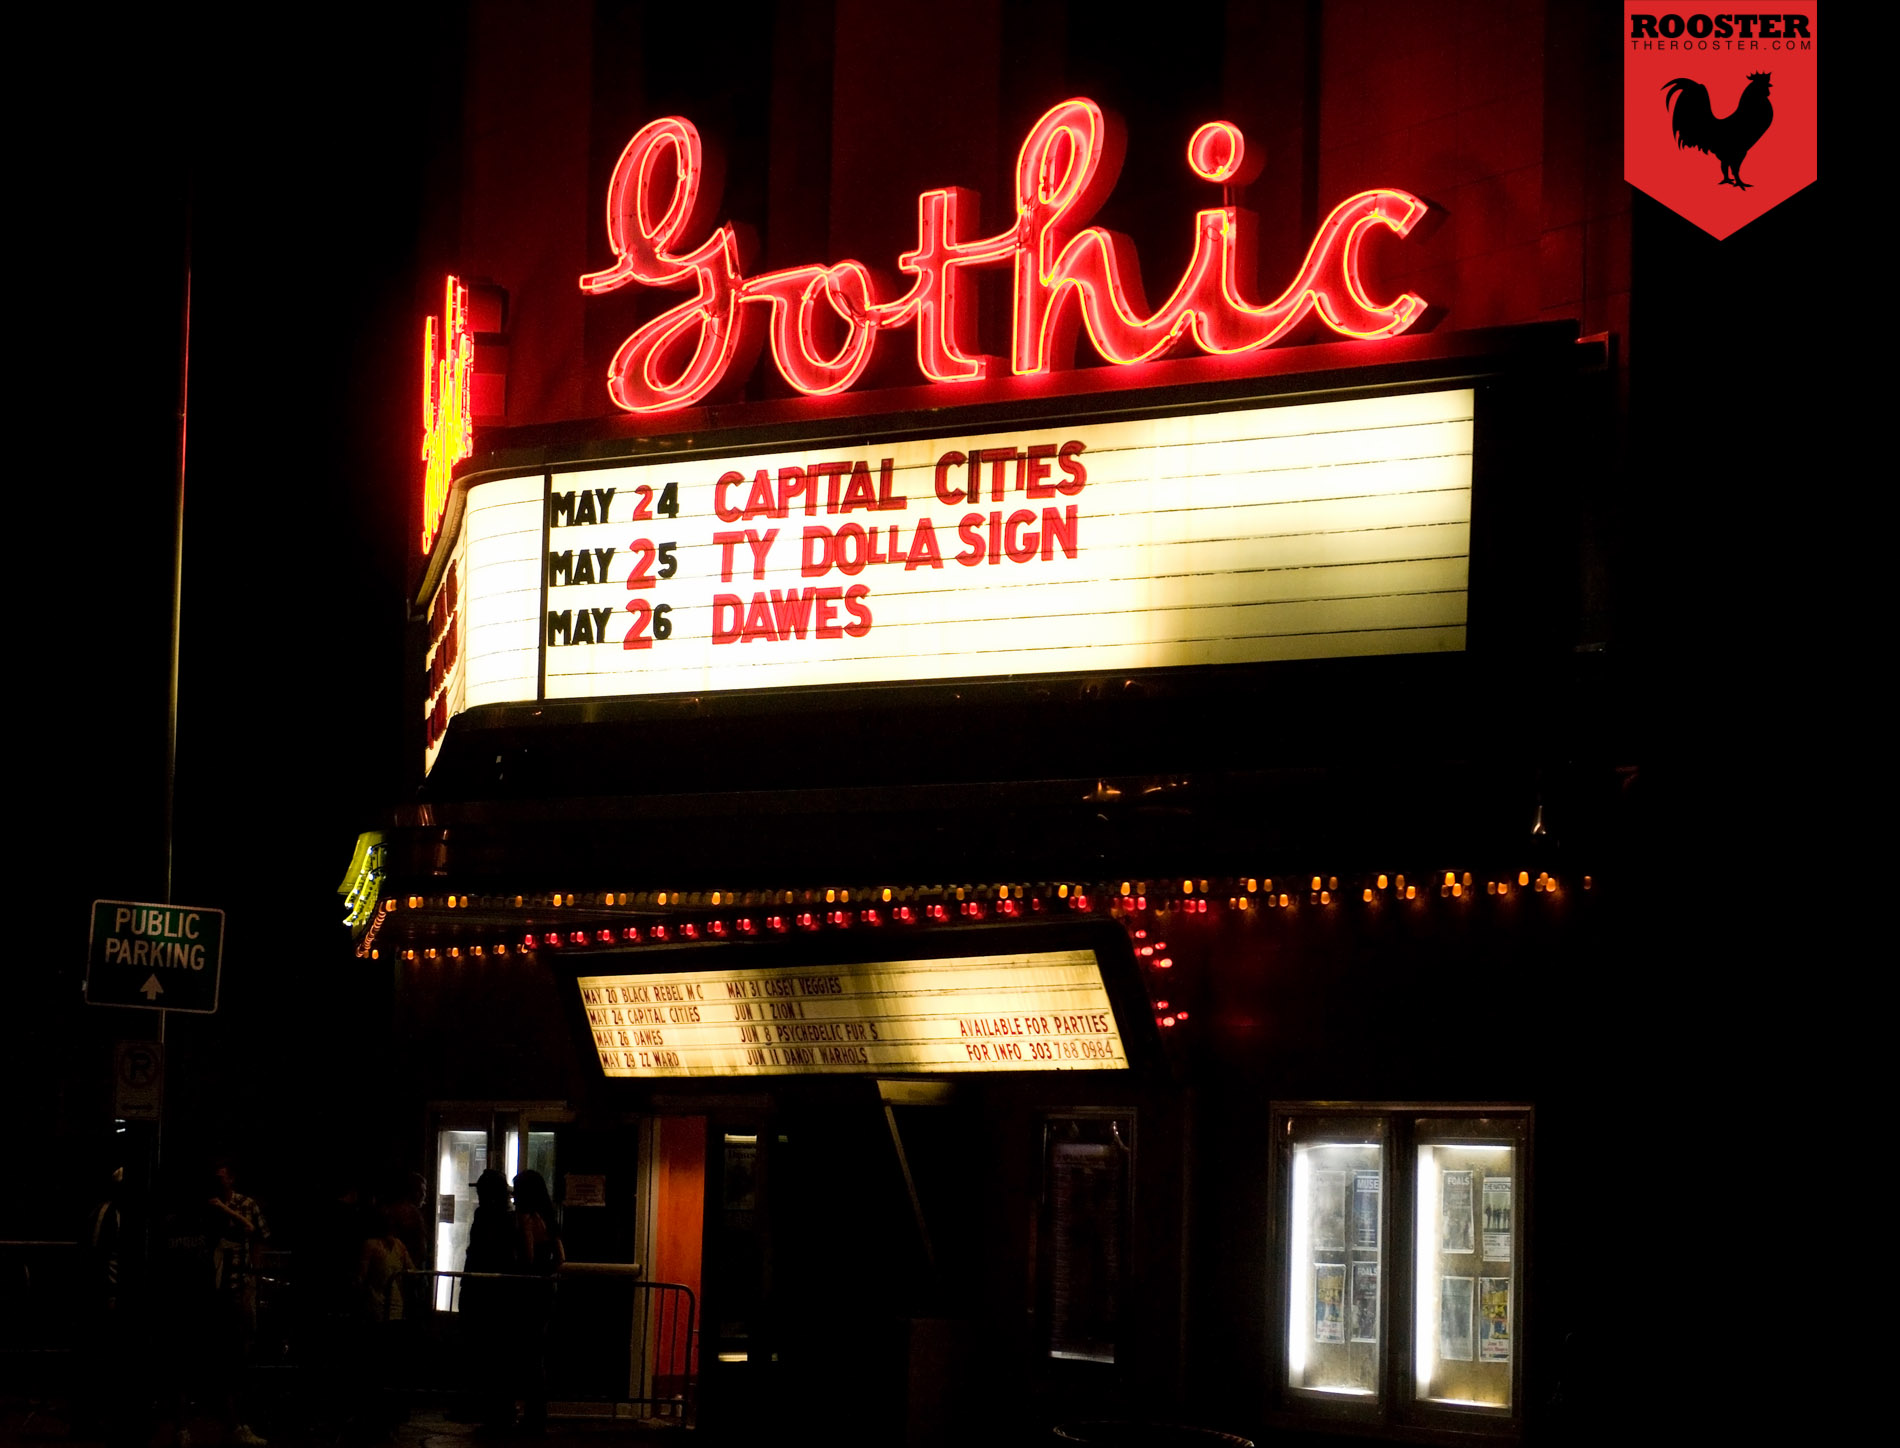 Capital Cities (8 of 8)